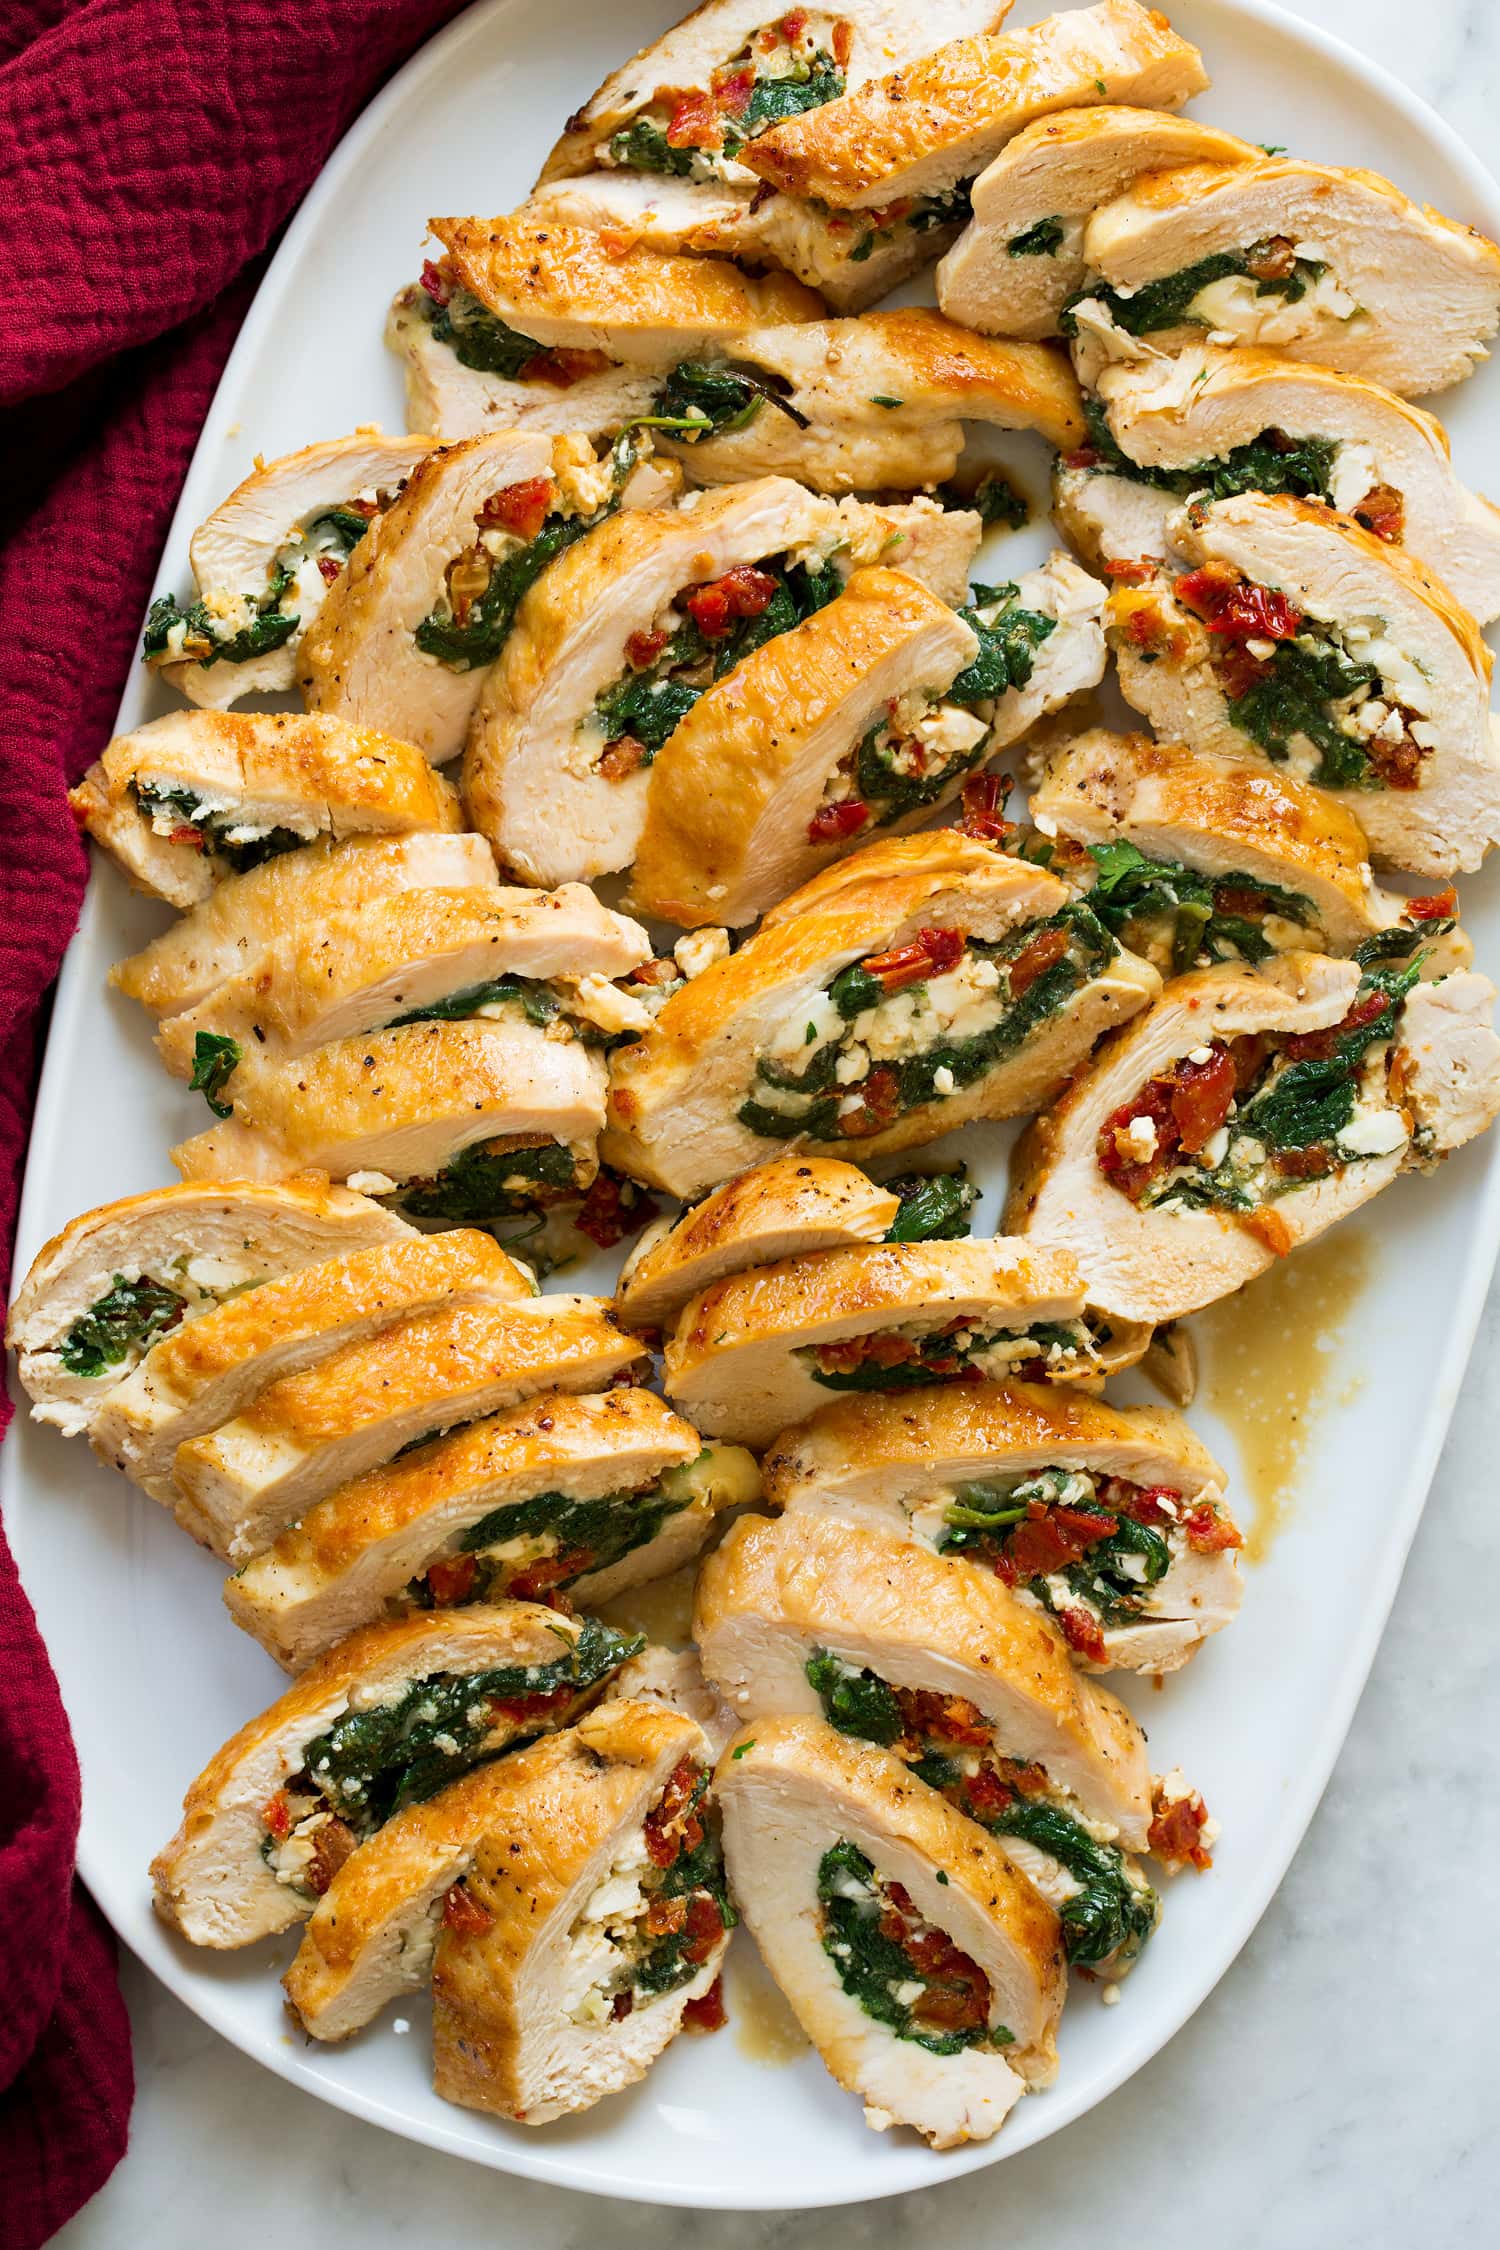 Stuffed chicken breasts with spinach, feta, mozzarella, and sun dried tomatoes.